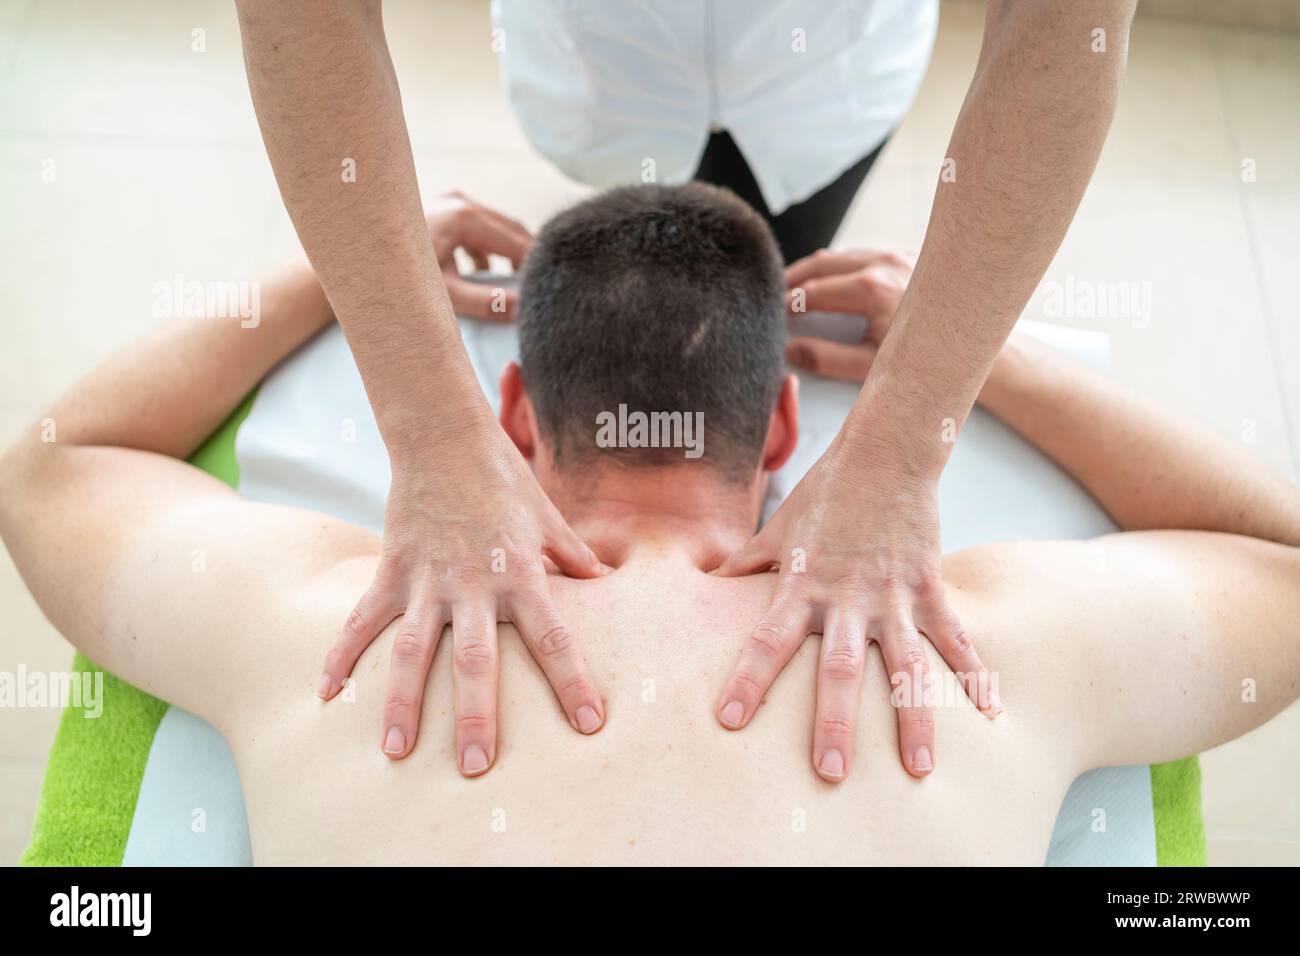 High angle of unrecognizable professional therapist pressing the back of a male patient lying on a table during a massage session at a clinic Stock Photo